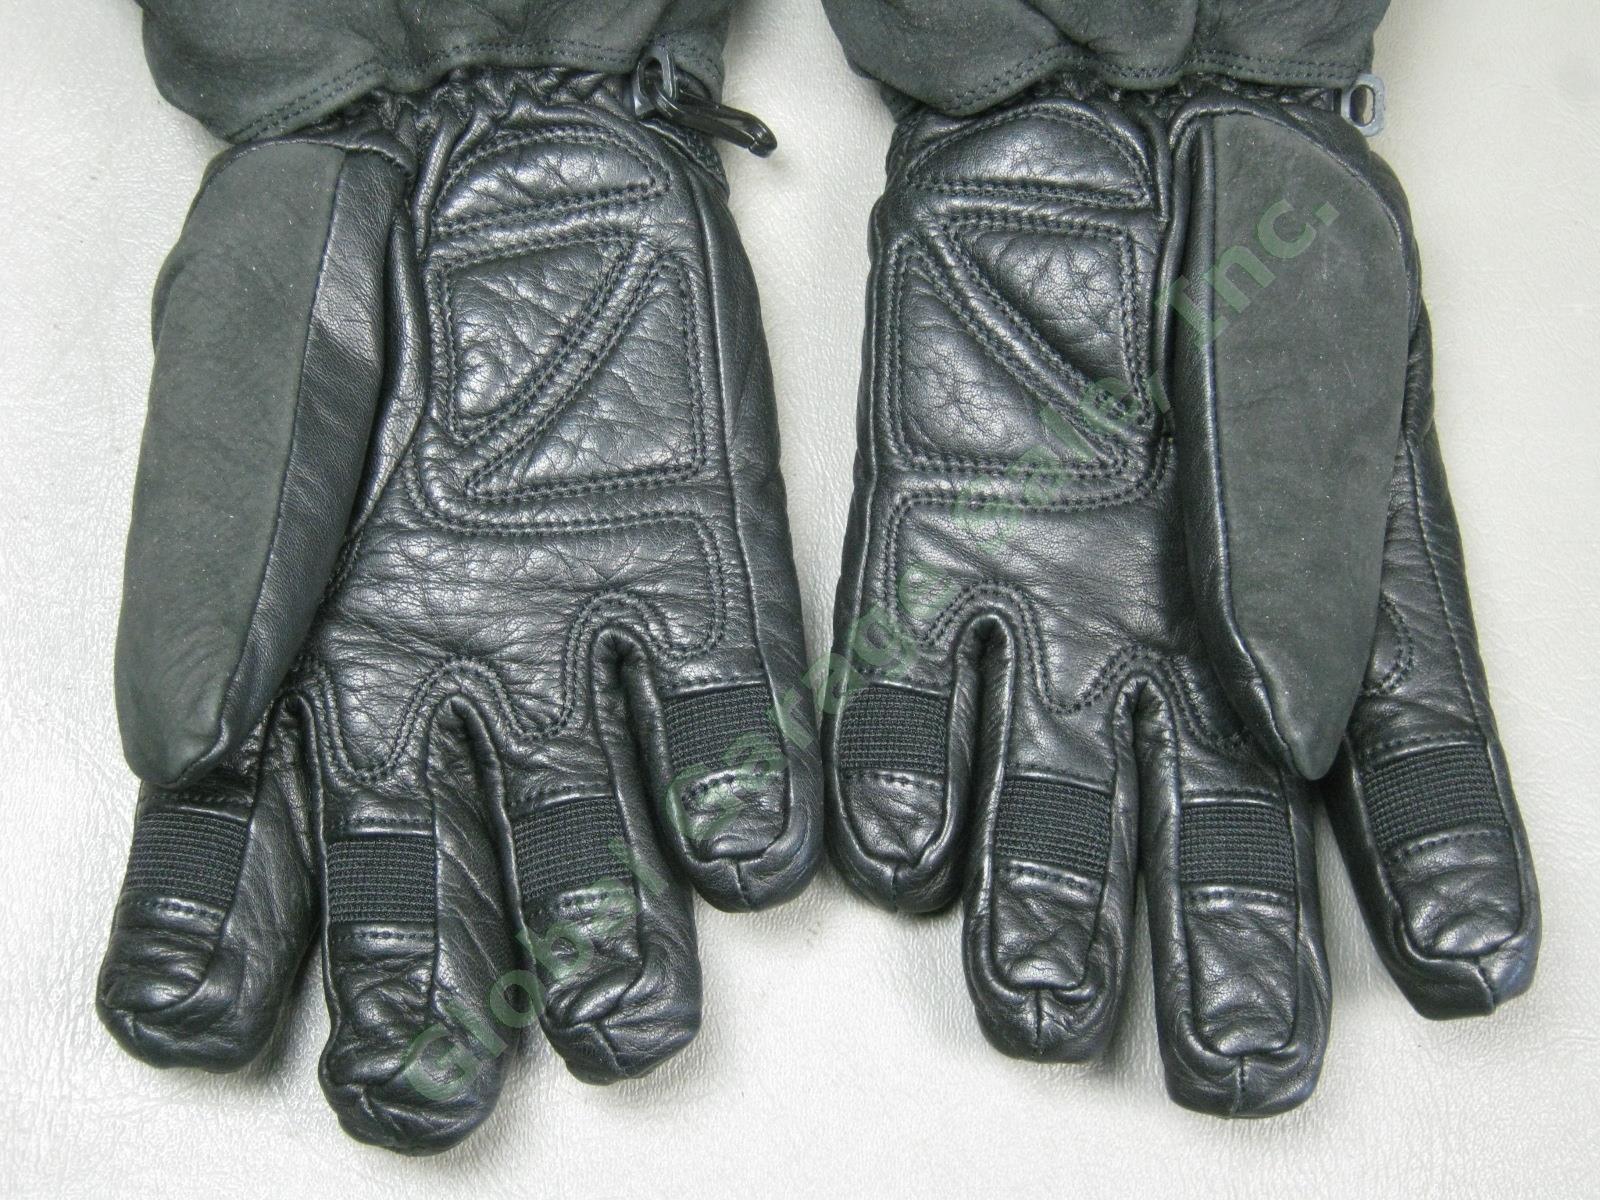 Harley Davidson Heated Black Leather Motorcycle Gloves Womens Small 98350-09VW 3